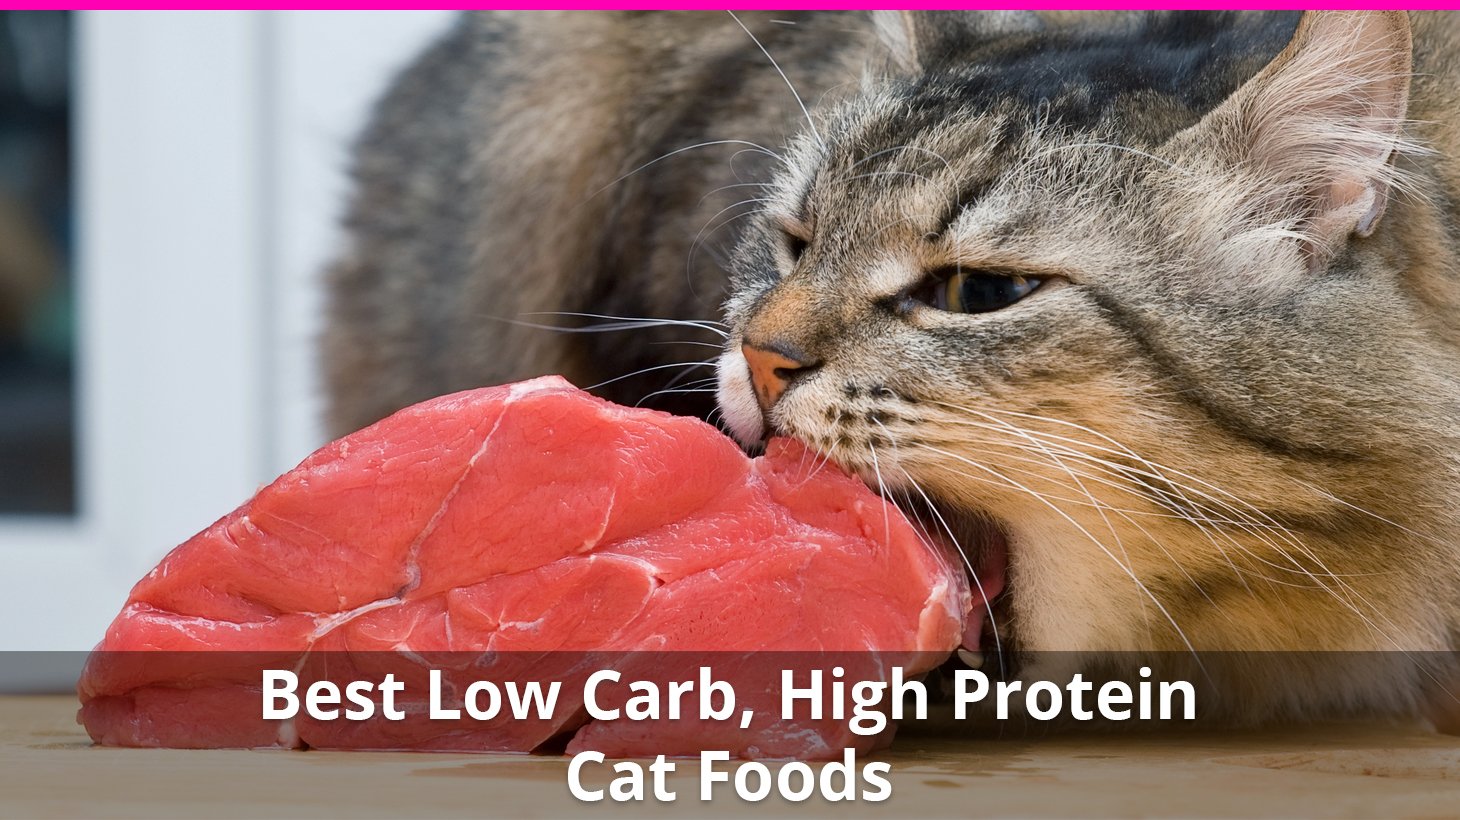 The Best High Protein, Low Carb Cat Food Reviews for 2021